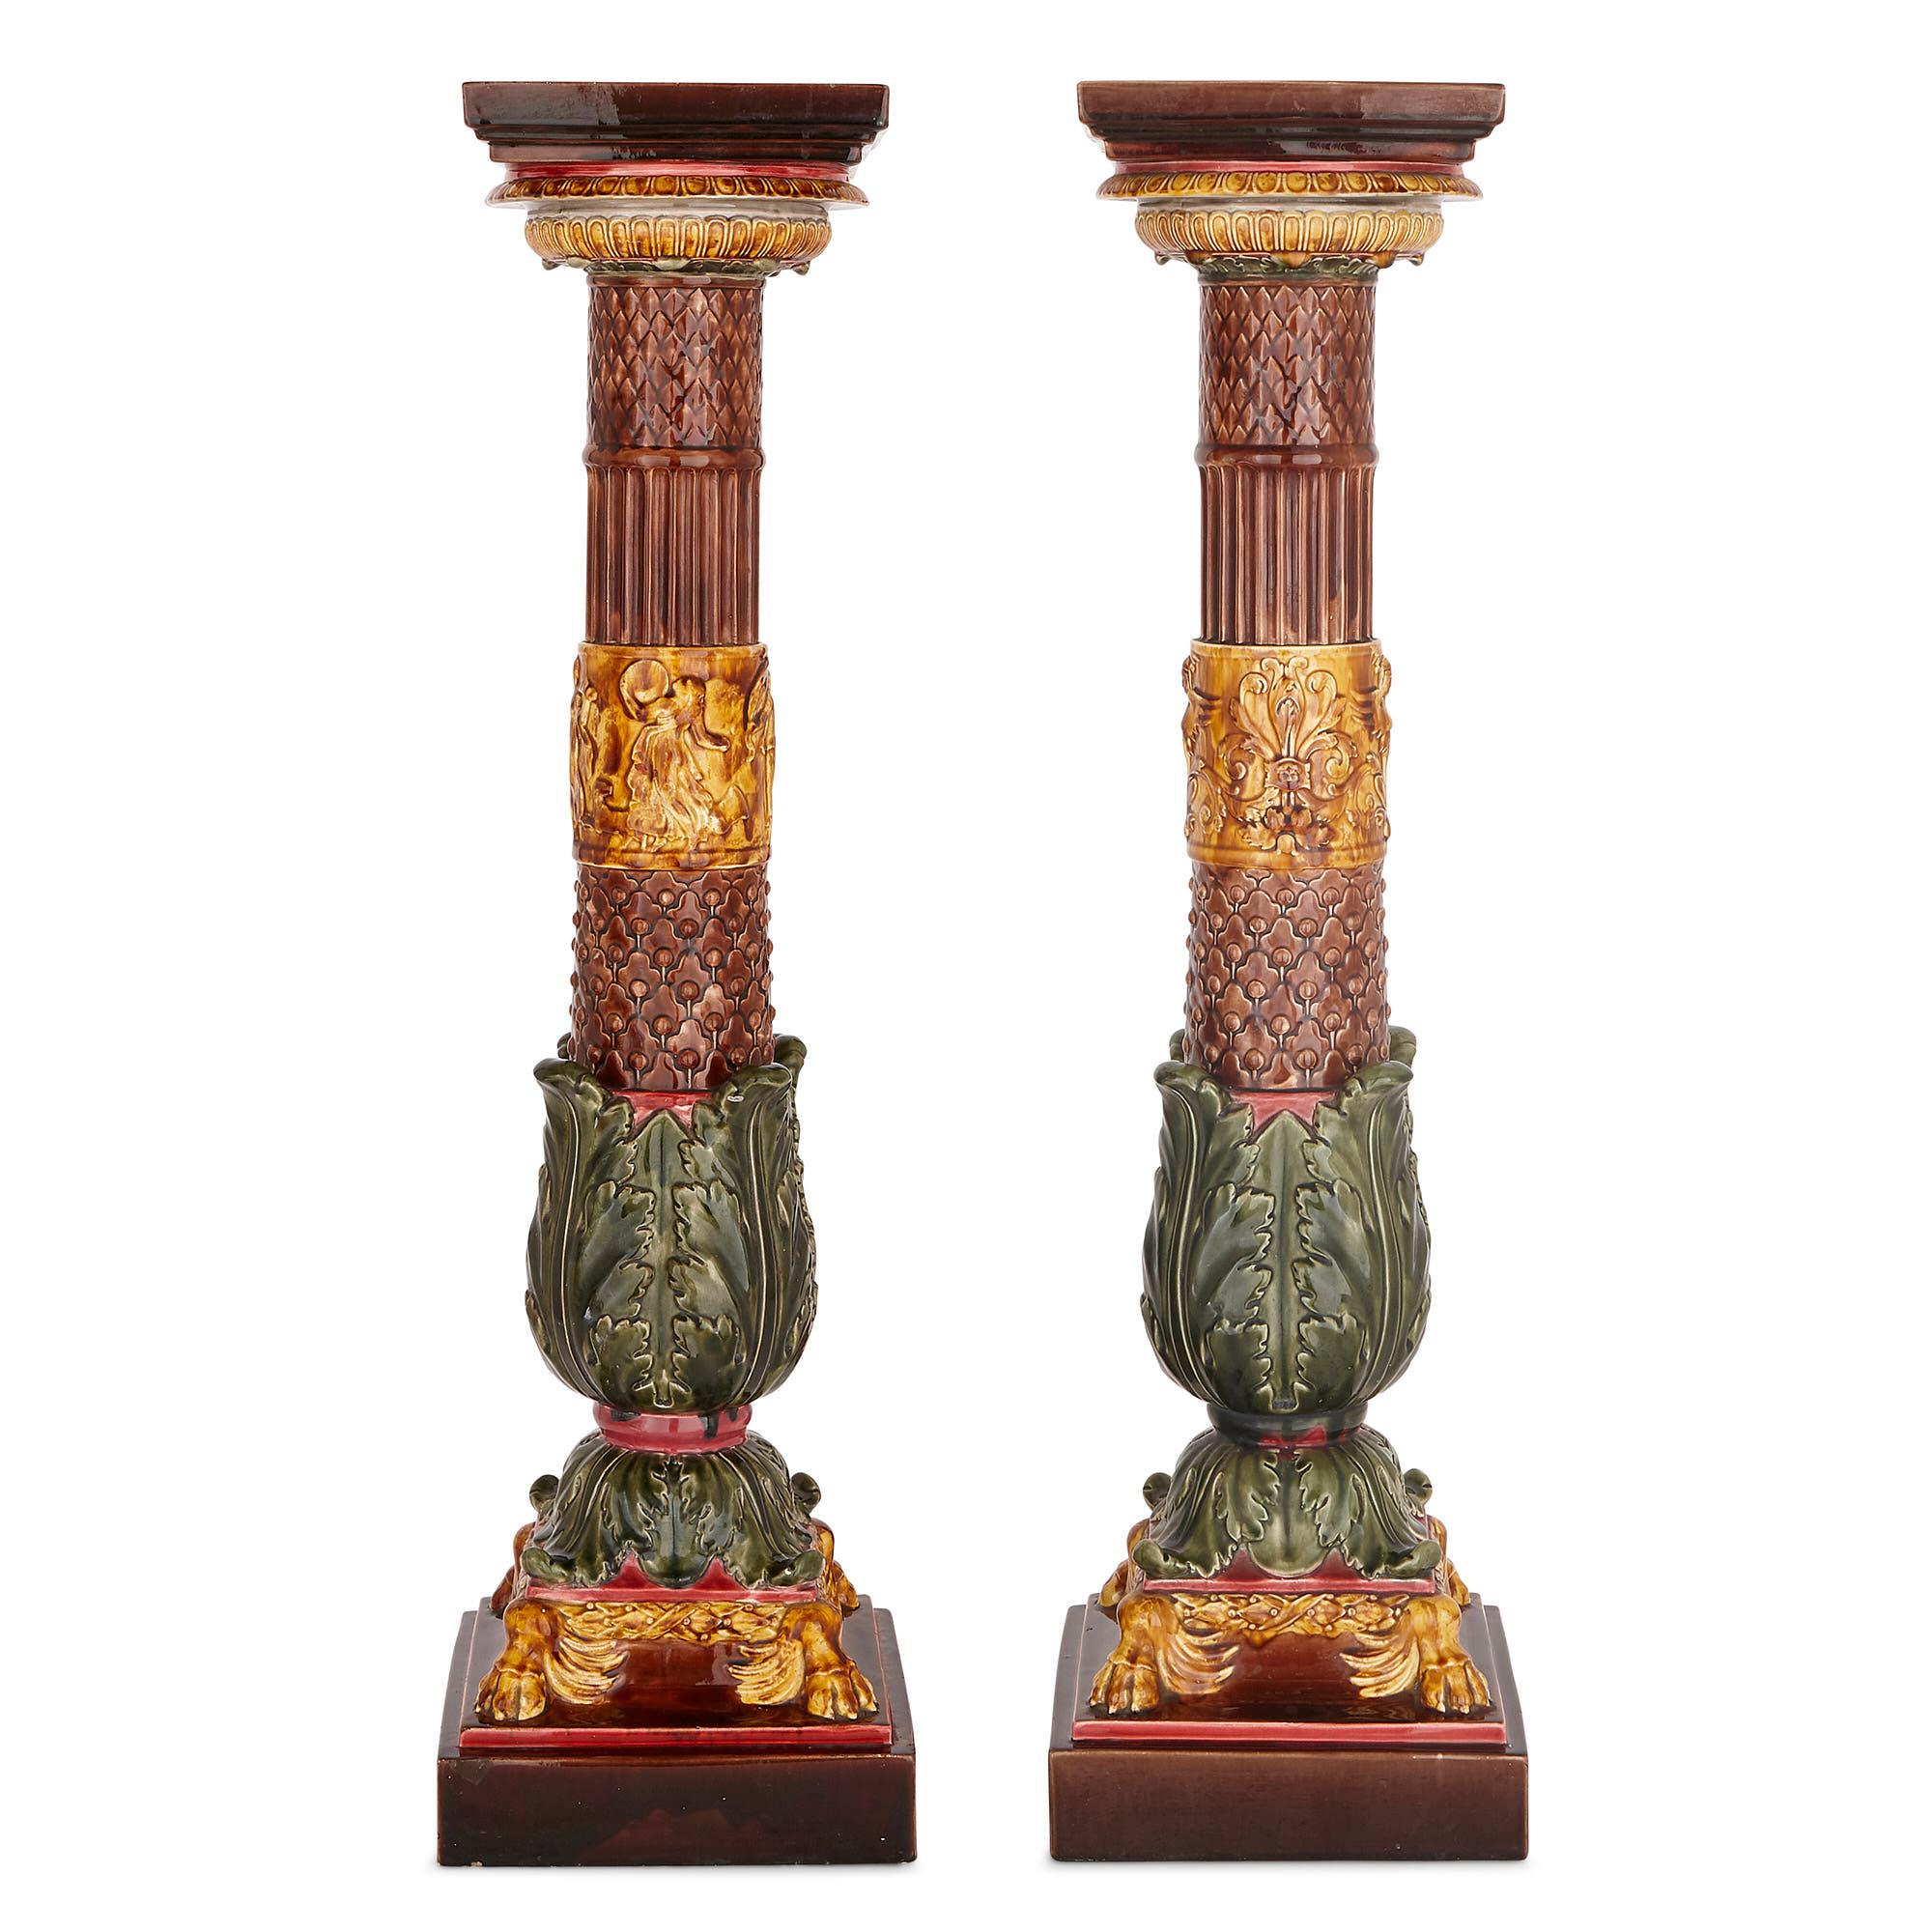 These charming majolica stands (or pedestals) were crafted in the late 19th century by the French Sarreguemines factory. Sarreguemines pottery was characterized by its use of organic colors and ornament, as exemplified by these pedestals. Napoleon I